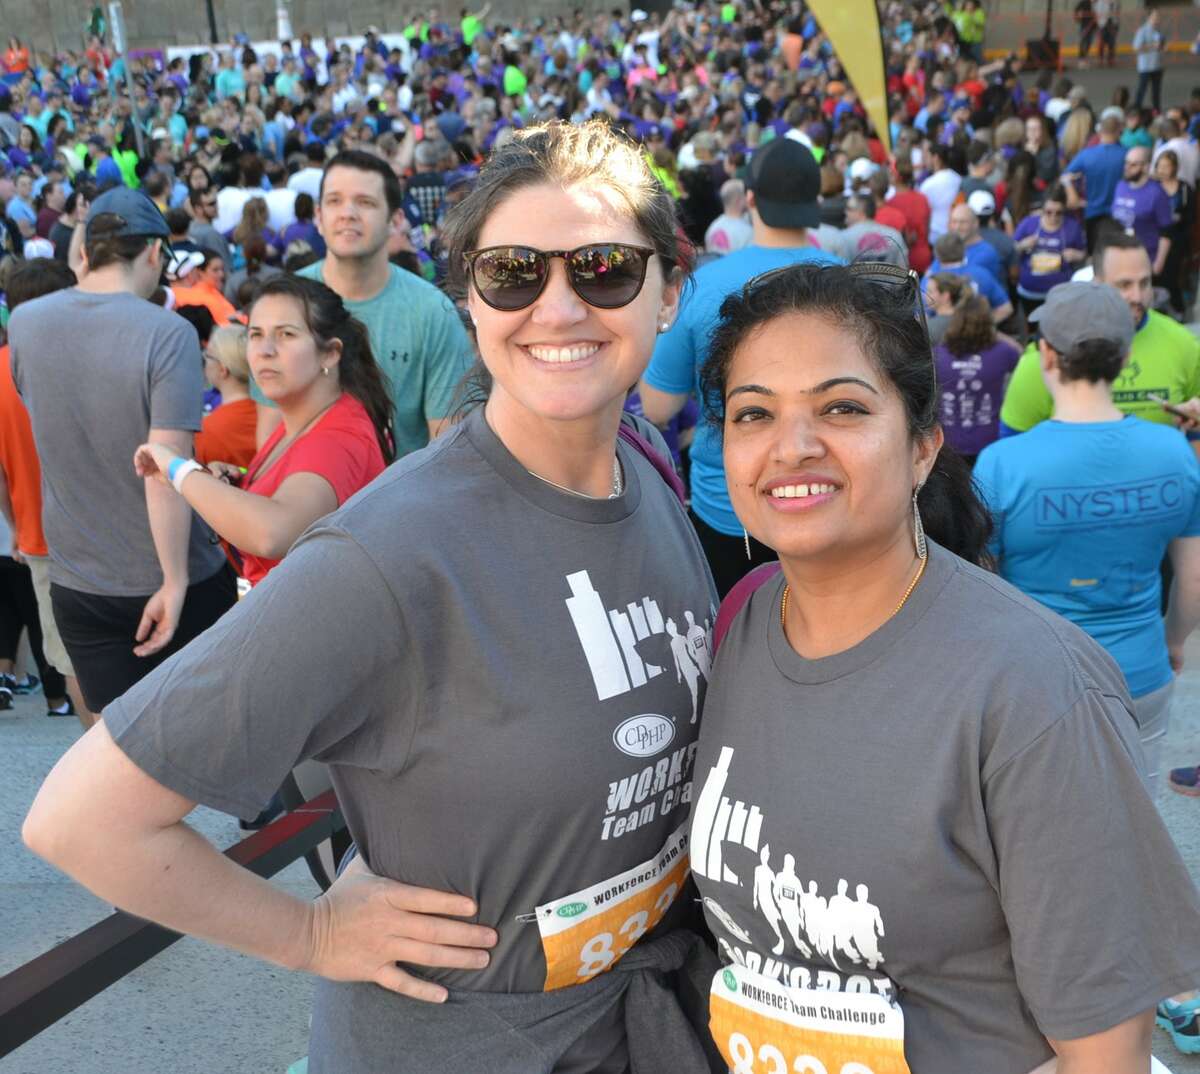 Were you Seen at the 2019 CDPHP Workforce Team Challenge in Albany on May 16, 2019?